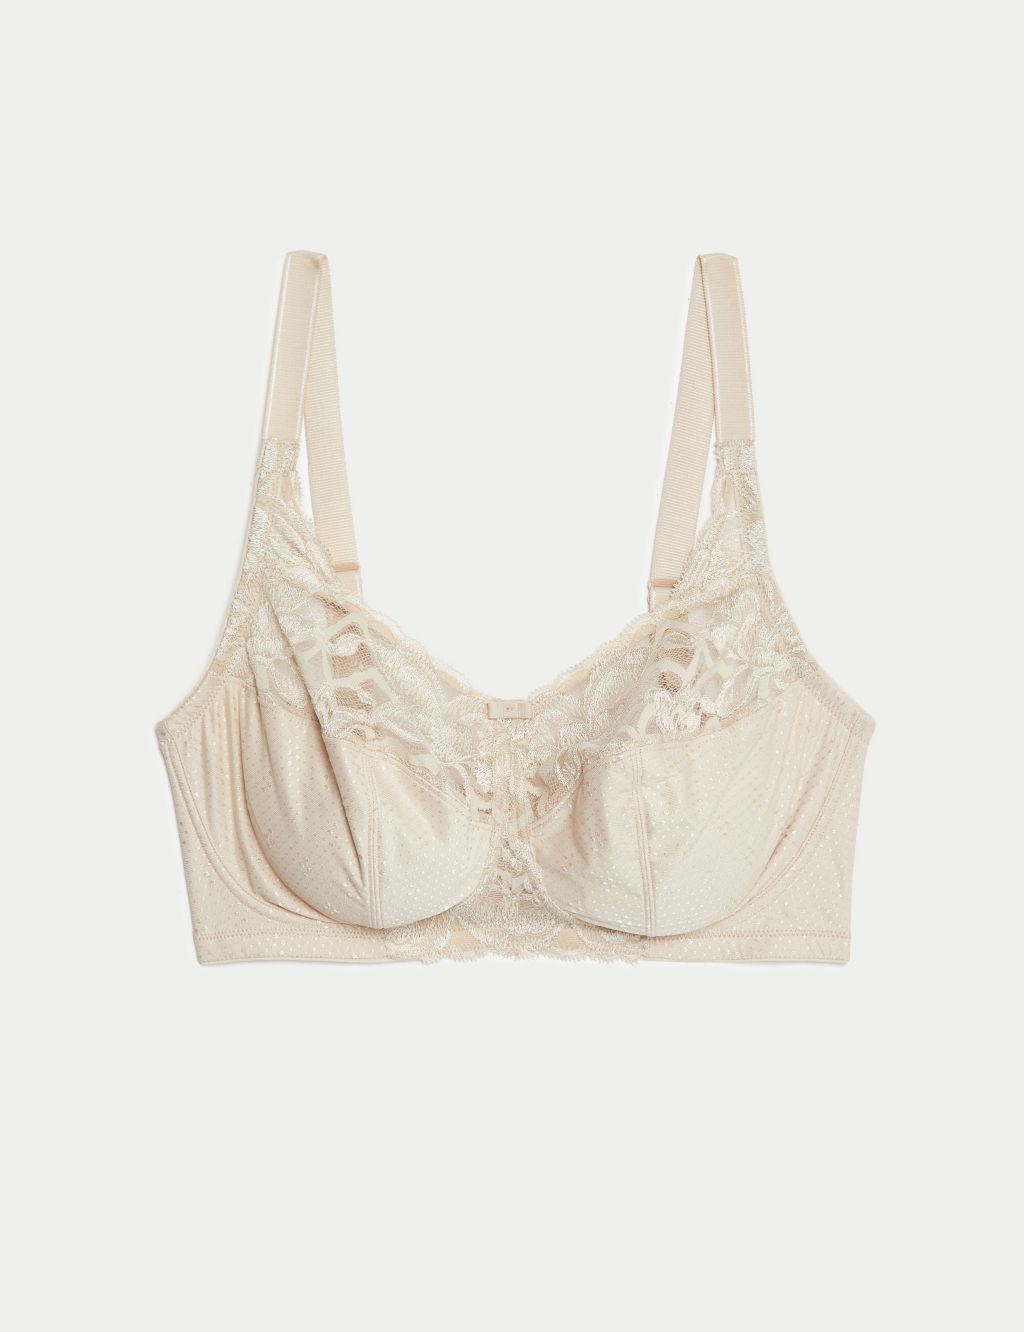 Total Support Wild Blooms Non-Wired Bra B-H image 2